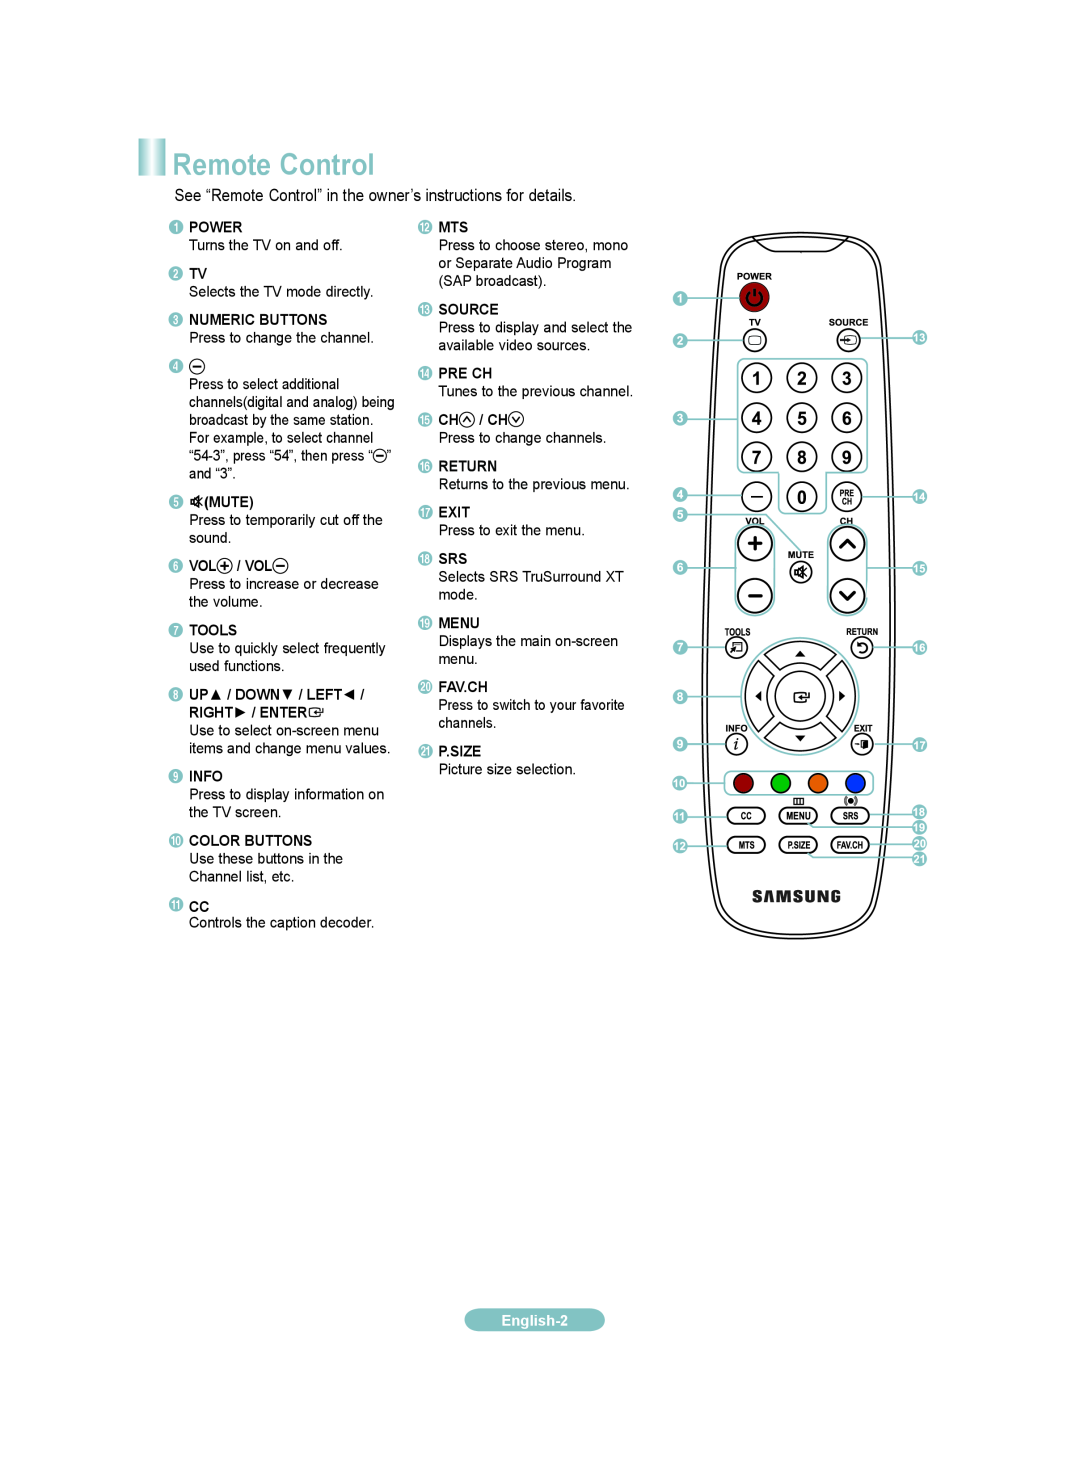 Samsung LN40A330JD, LN32A330JD, LN26A330JD manual See “Remote Control” in the owner’s instructions for details, English 